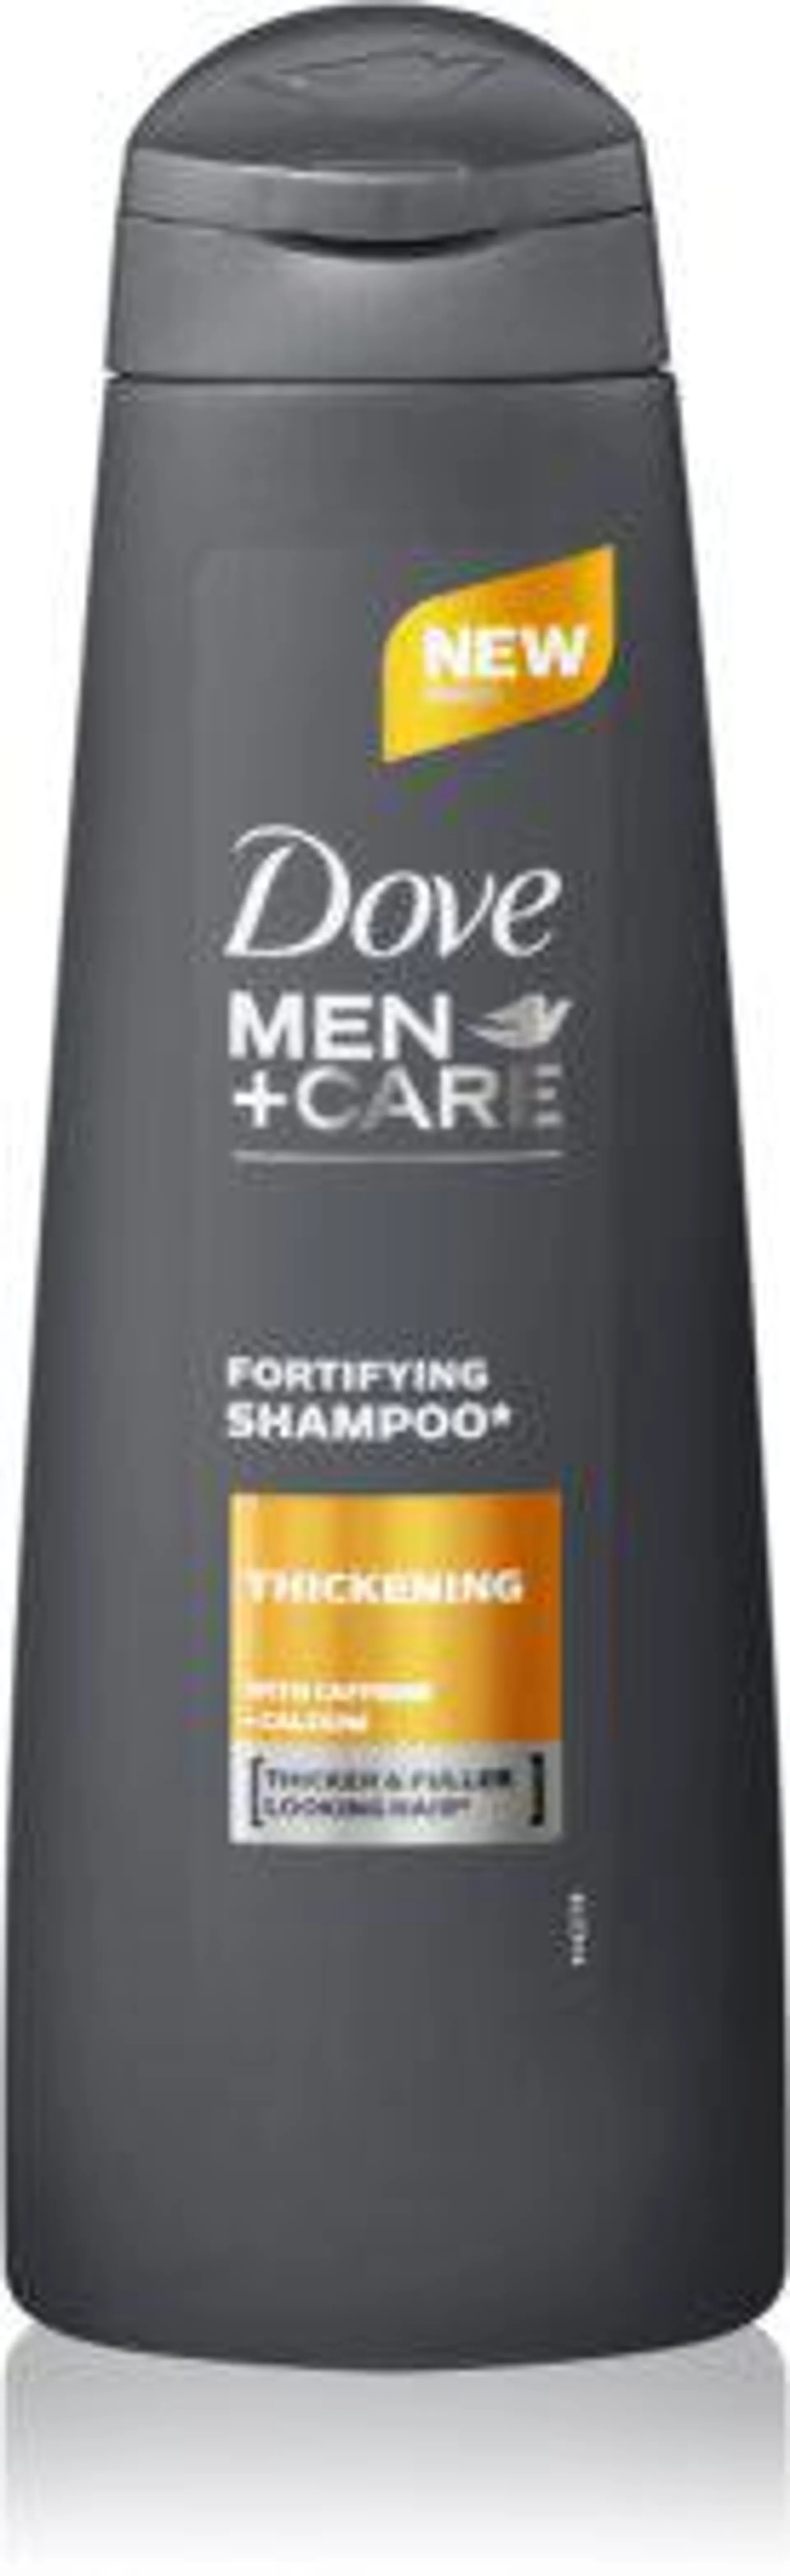 Men+Care Thickening